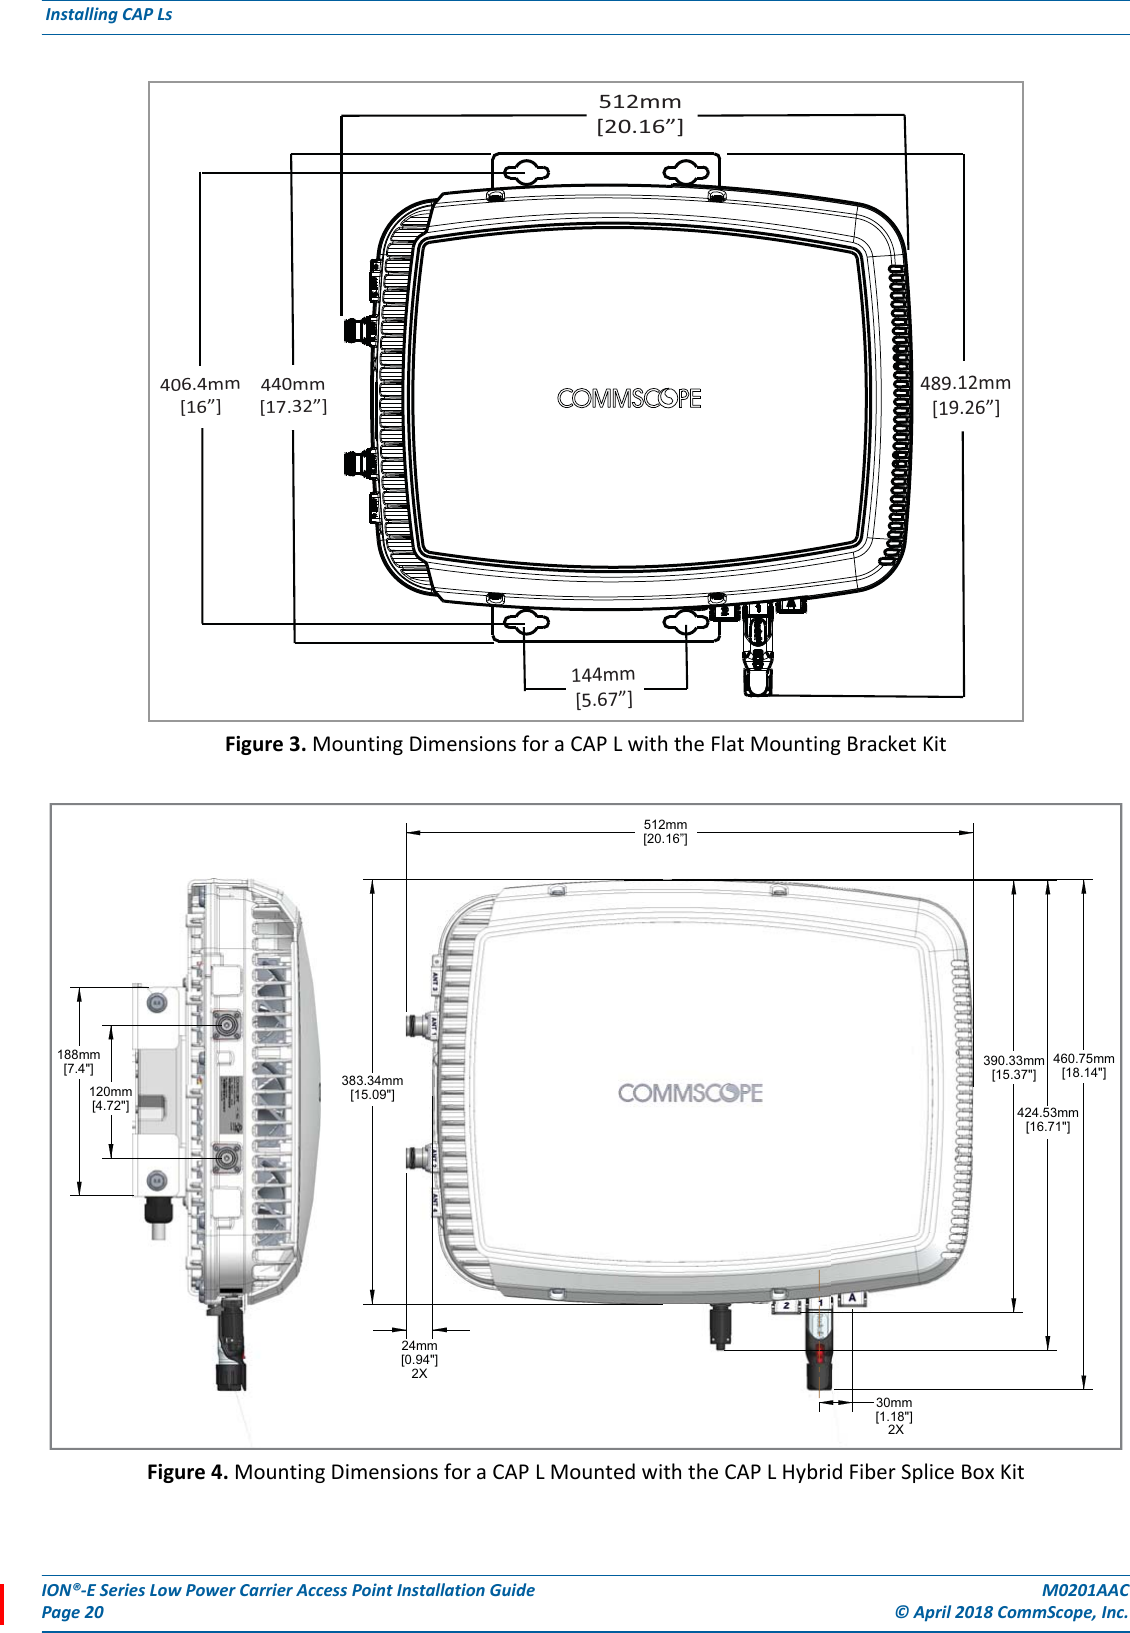 ION®-E Series Low Power Carrier Access Point Installation Guide M0201AACPage 20 © April 2018 CommScope, Inc. Installing CAP Ls  Figure 3. Mounting Dimensions for a CAP L with the Flat Mounting Bracket KitFigure 4. Mounting Dimensions for a CAP L Mounted with the CAP L Hybrid Fiber Splice Box Kit489.12mm[19.26”]512mm[20.16”]144mm[5.67”]440mm[17.32”]406.4mm[16”]120mm[4.72&quot;]383.34mm[15.09&quot;]512mm[20.16”]30mm 2X[1.18&quot;]424.53mm[16.71&quot;]390.33mm[15.37&quot;]24mm[0.94&quot;]2X188mm[7.4&quot;] 460.75mm[18.14&quot;]